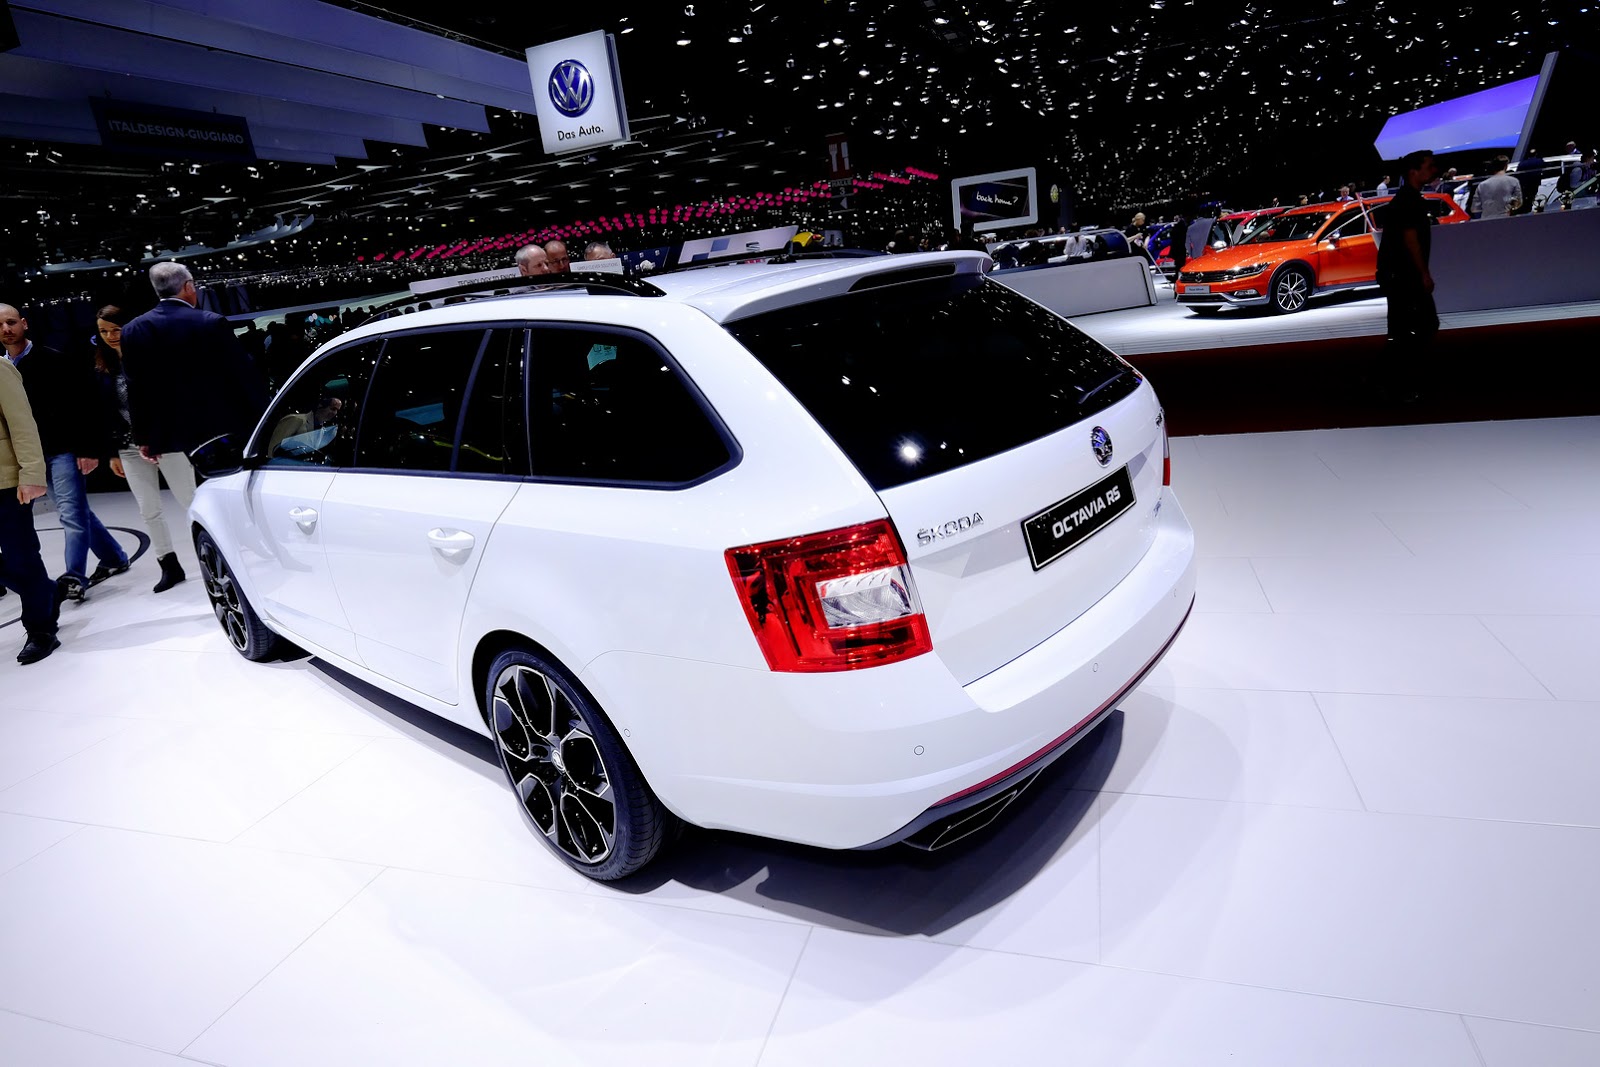 New Skoda Octavia RS 230 is the Definition of Practical, Fast and Modern